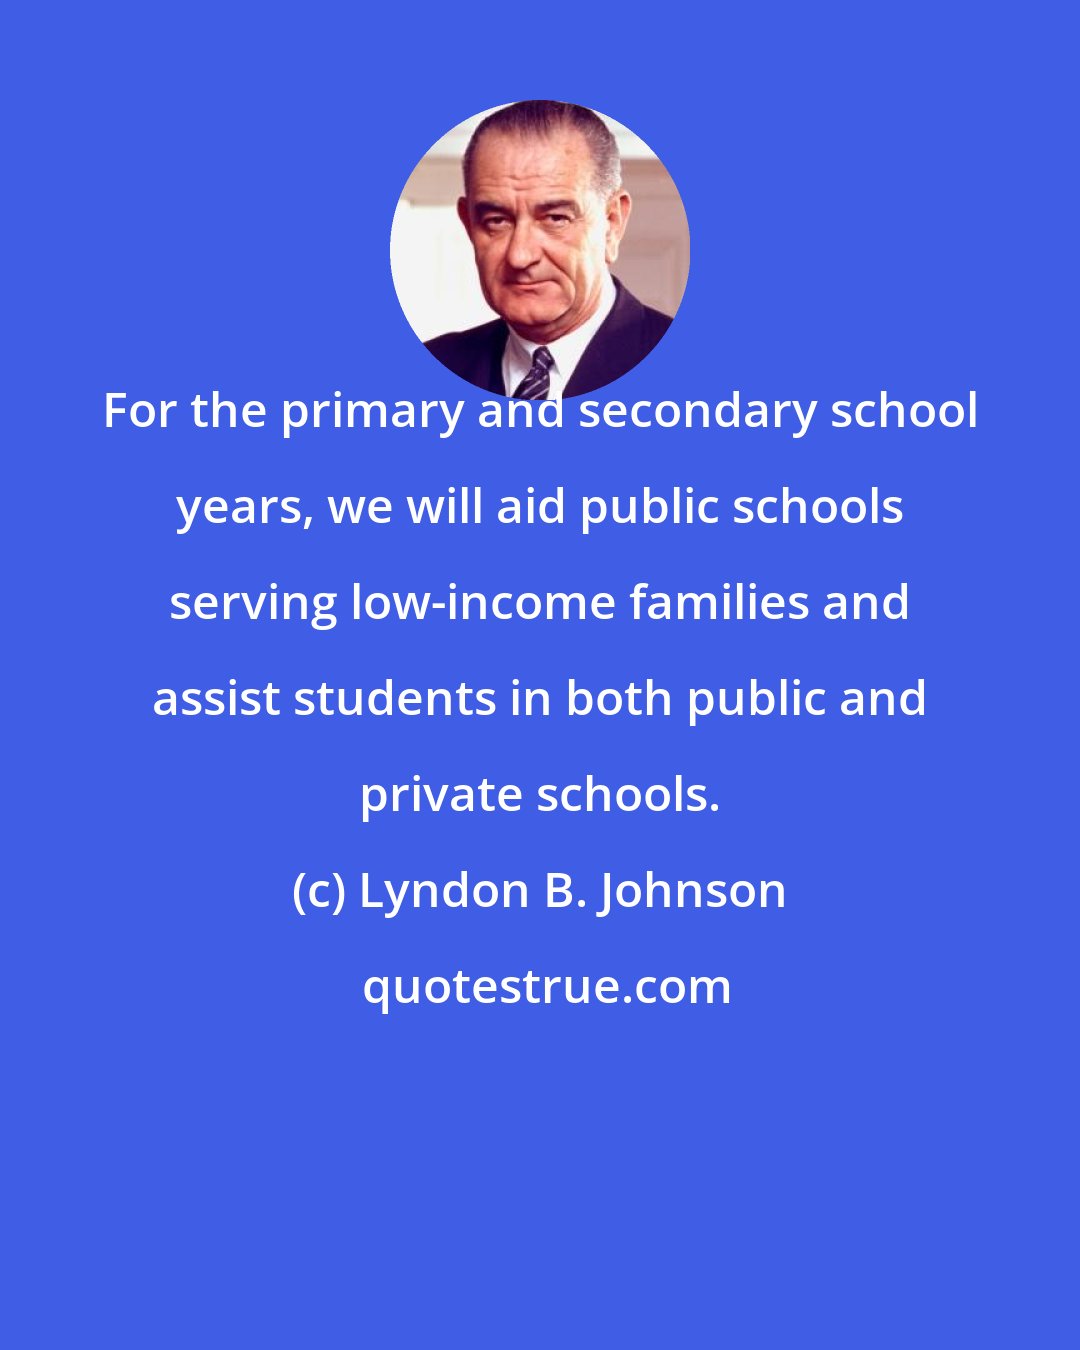 Lyndon B. Johnson: For the primary and secondary school years, we will aid public schools serving low-income families and assist students in both public and private schools.